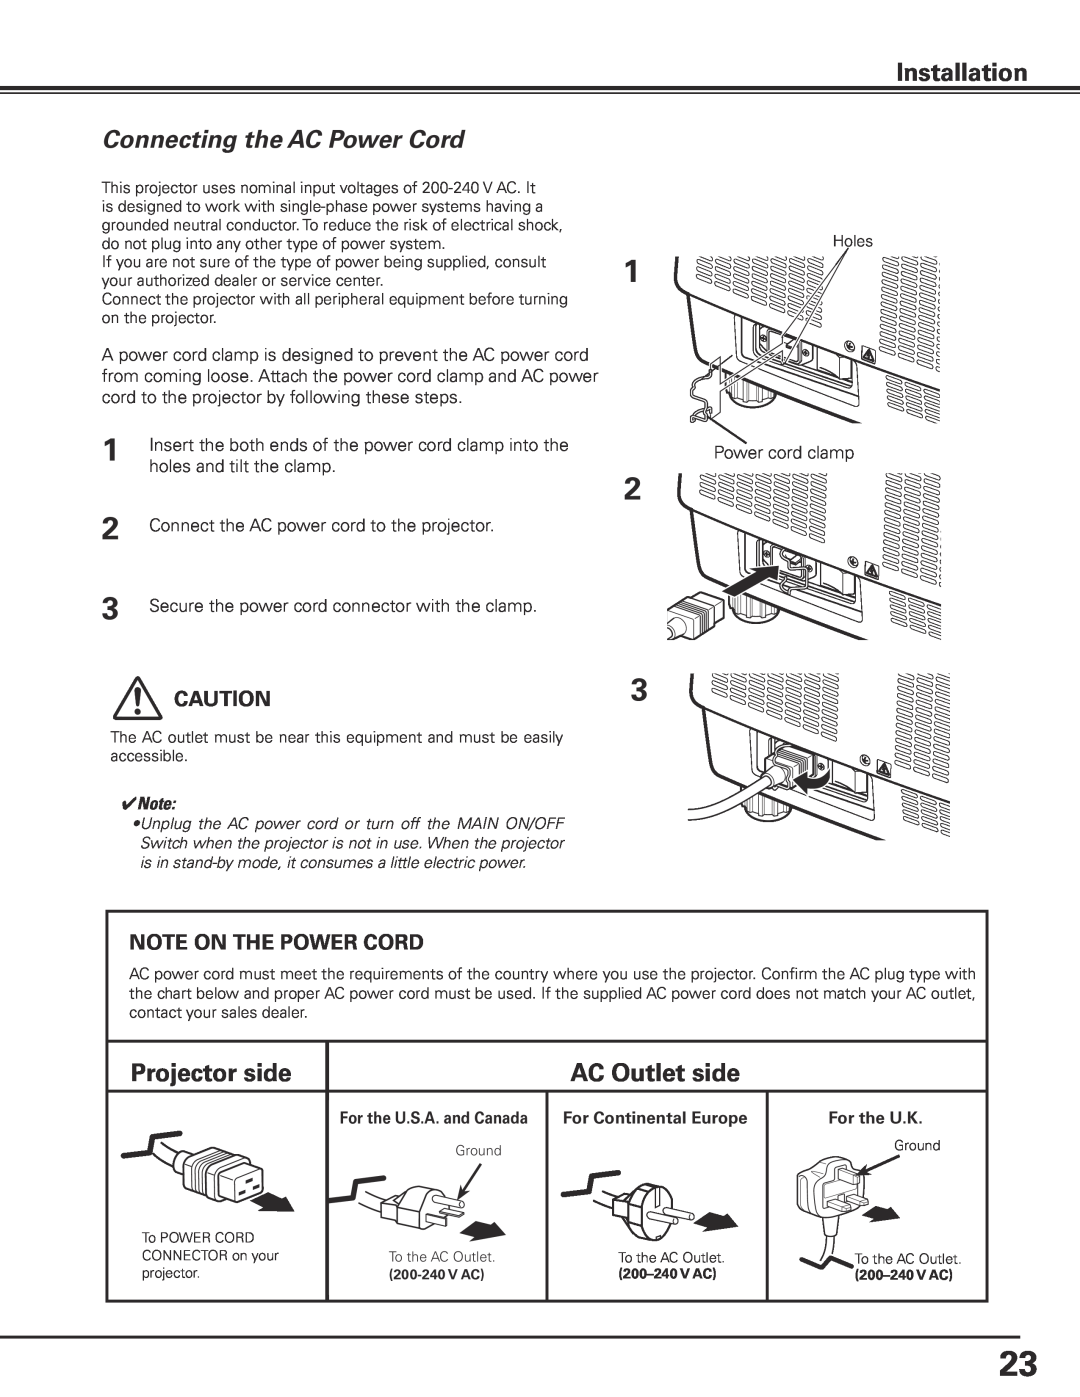 Sanyo HF15000L owner manual Connecting the AC Power Cord, Projector side, AC Outlet side, Installation, For the U.K 